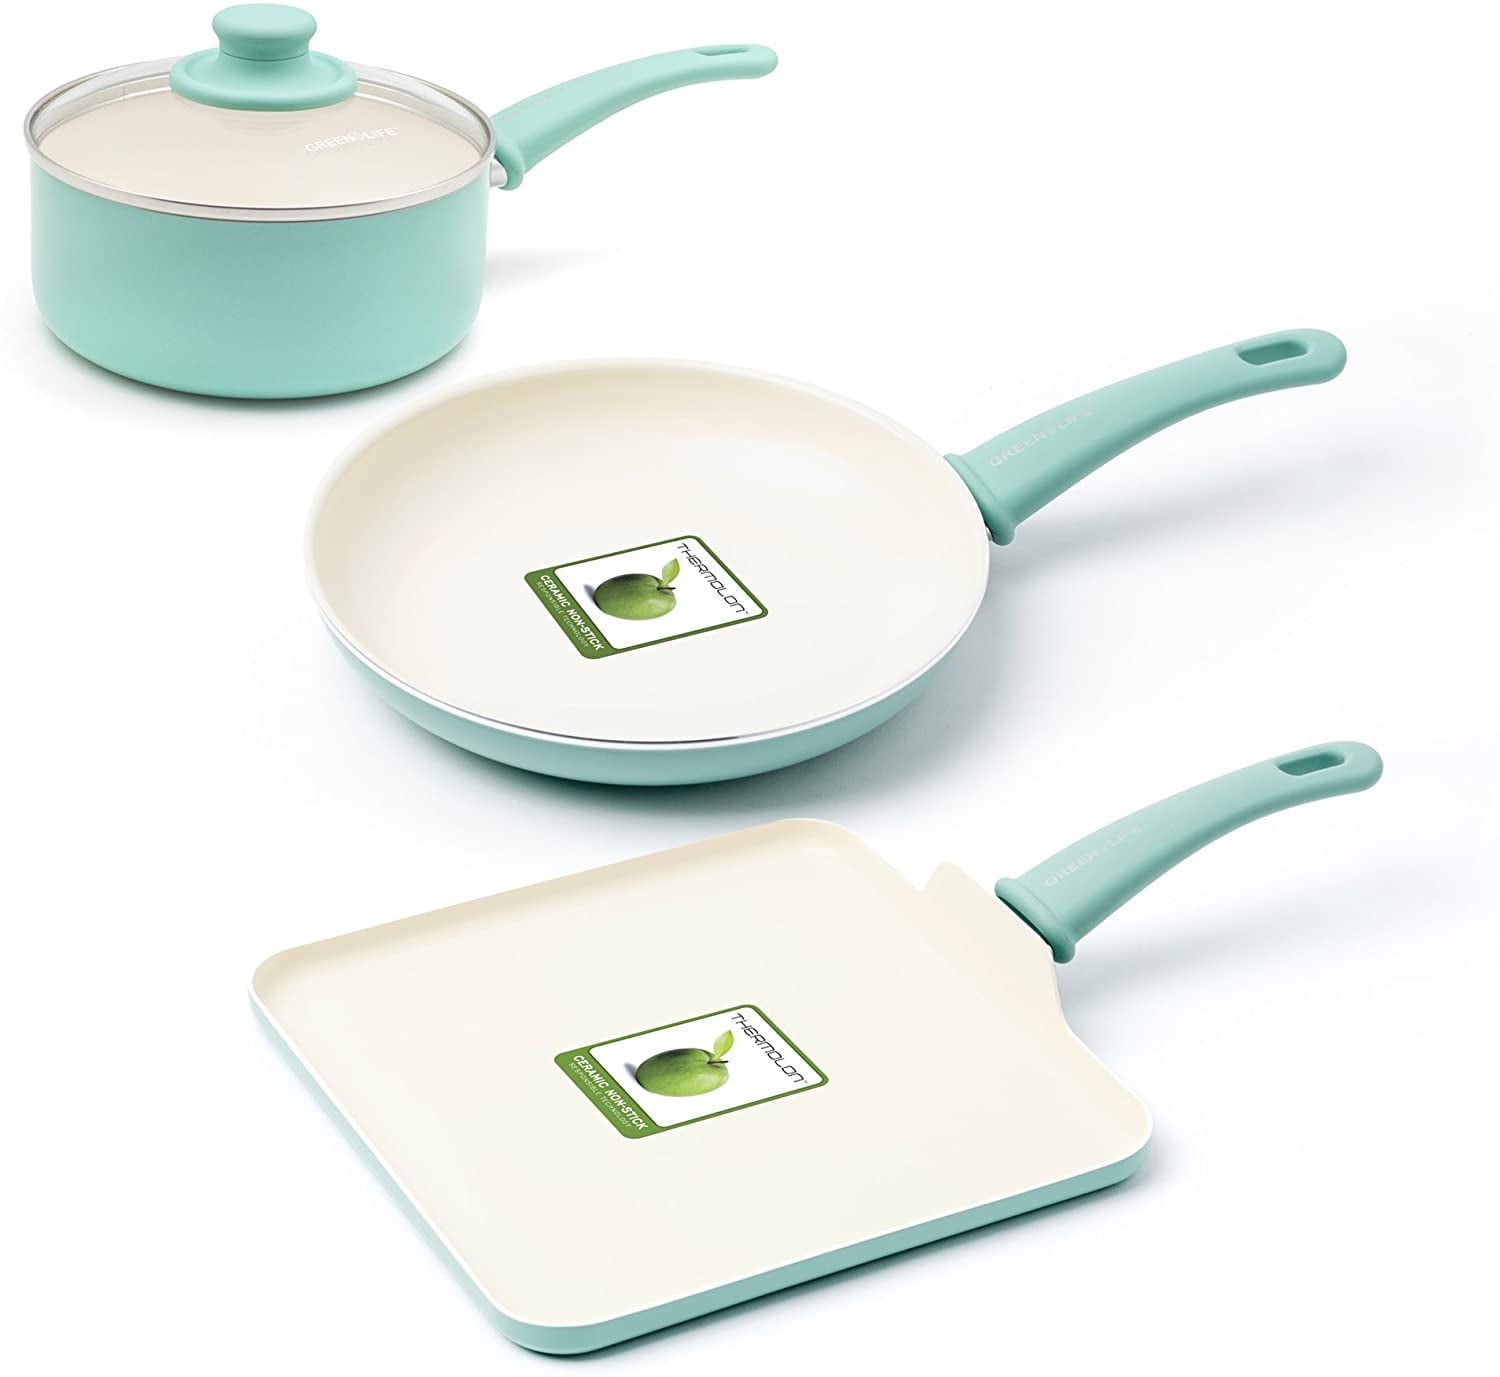 GreenLife Soft Grip Absolutely Toxin-Free Healthy Ceramic Nonstick  Dishwasher/Oven Safe Stay Cool Handle Cookware Set, 4-Piece, Turquoise